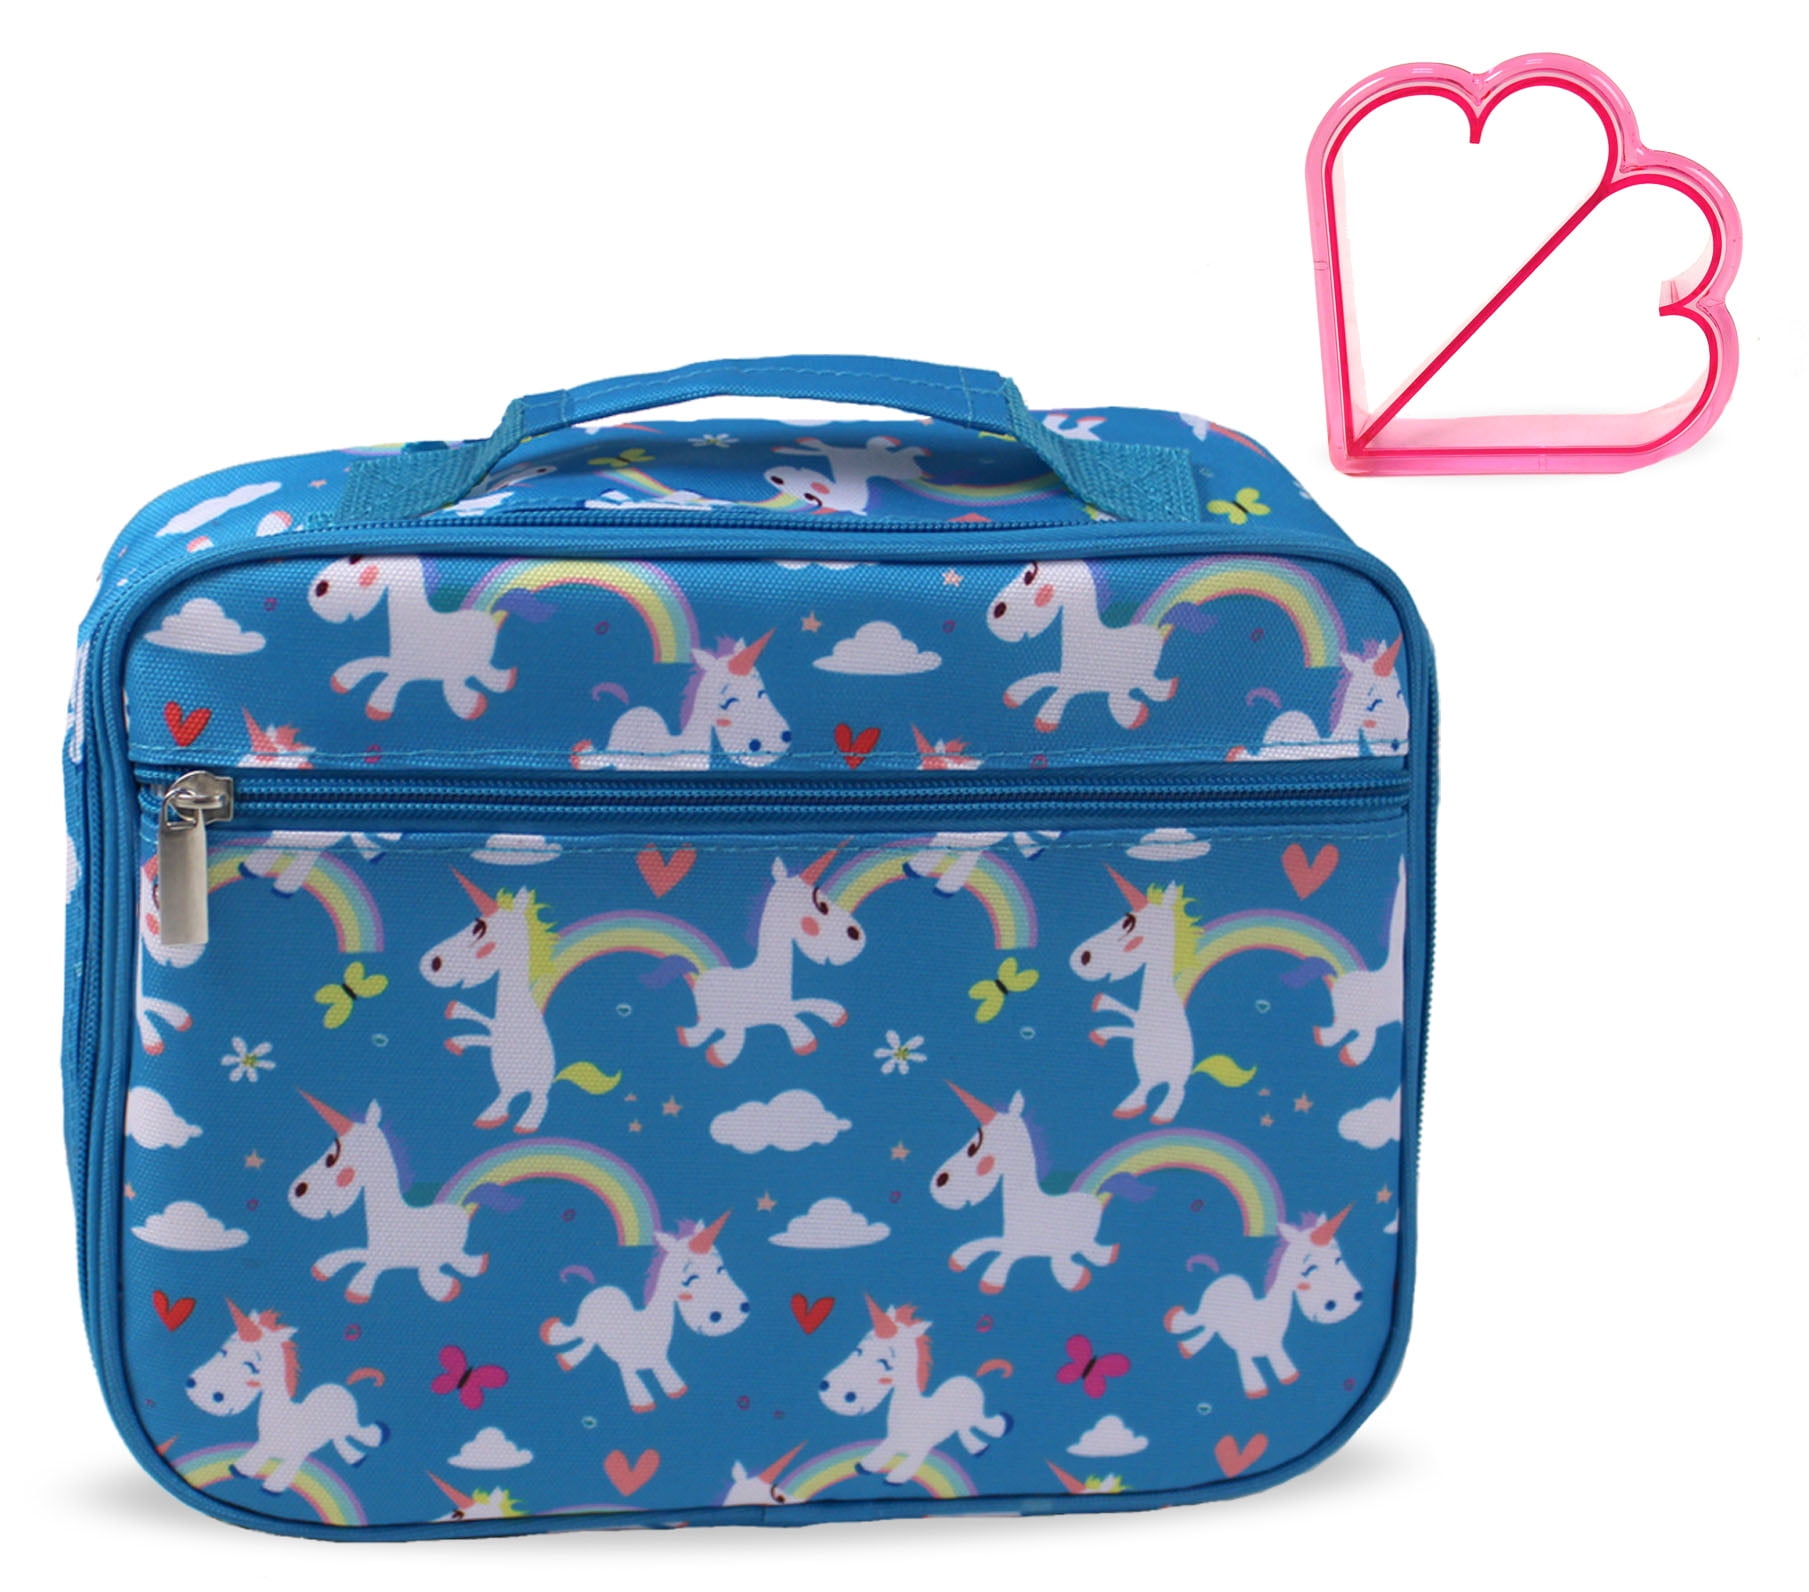 Unicorn Dog Shark Lunch Bag Girls Boys Insulated School Thermal Box Container 